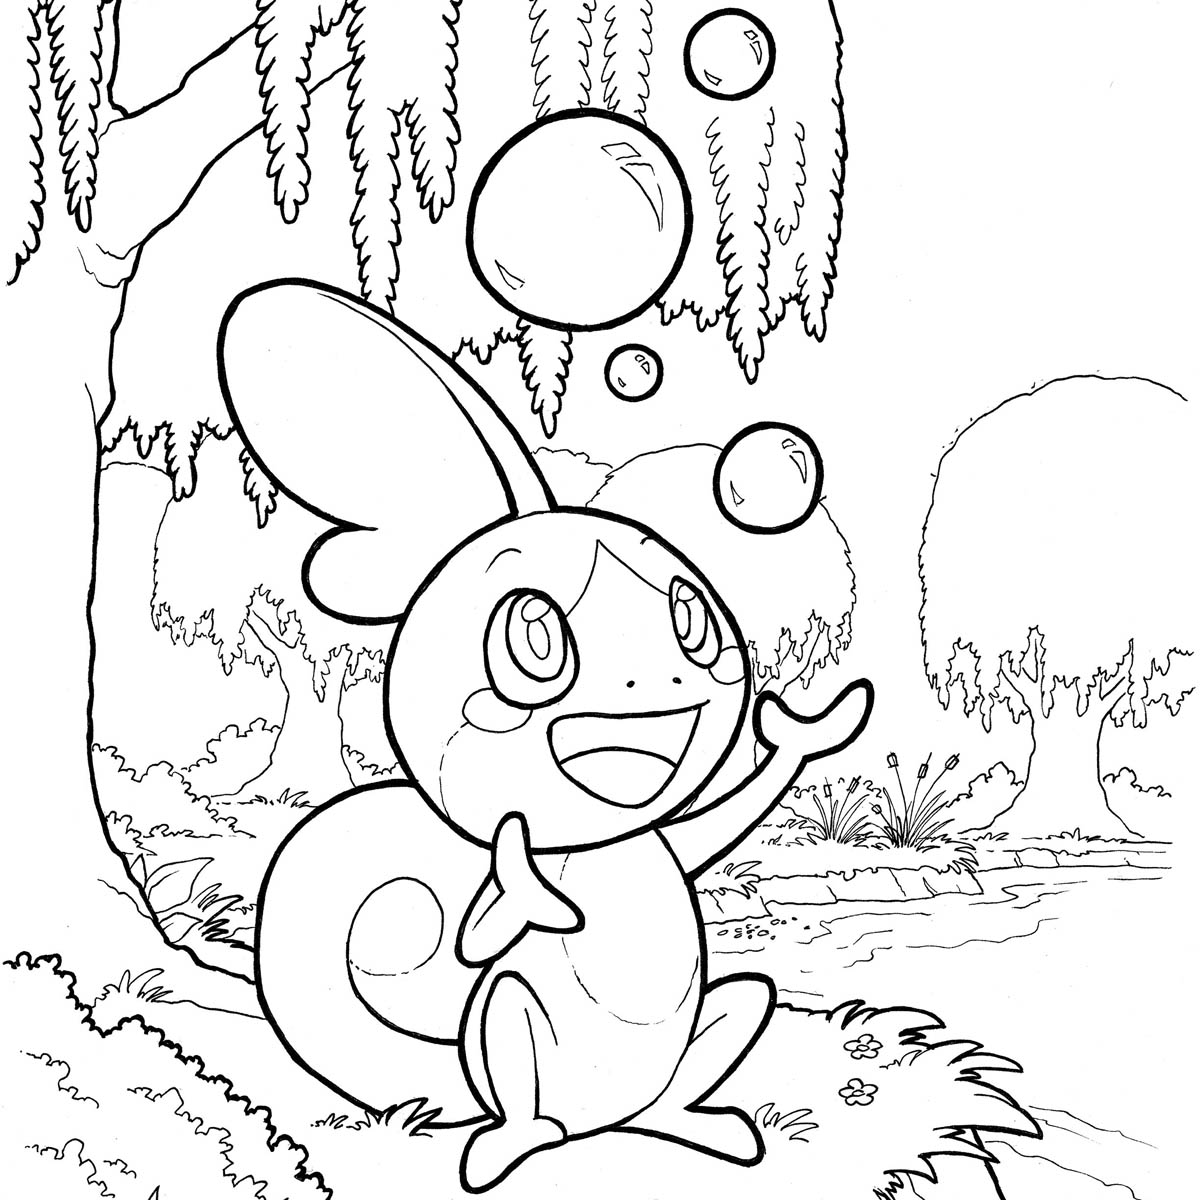 Free Sobble Pokemon Coloring Pages with Bubbles printable